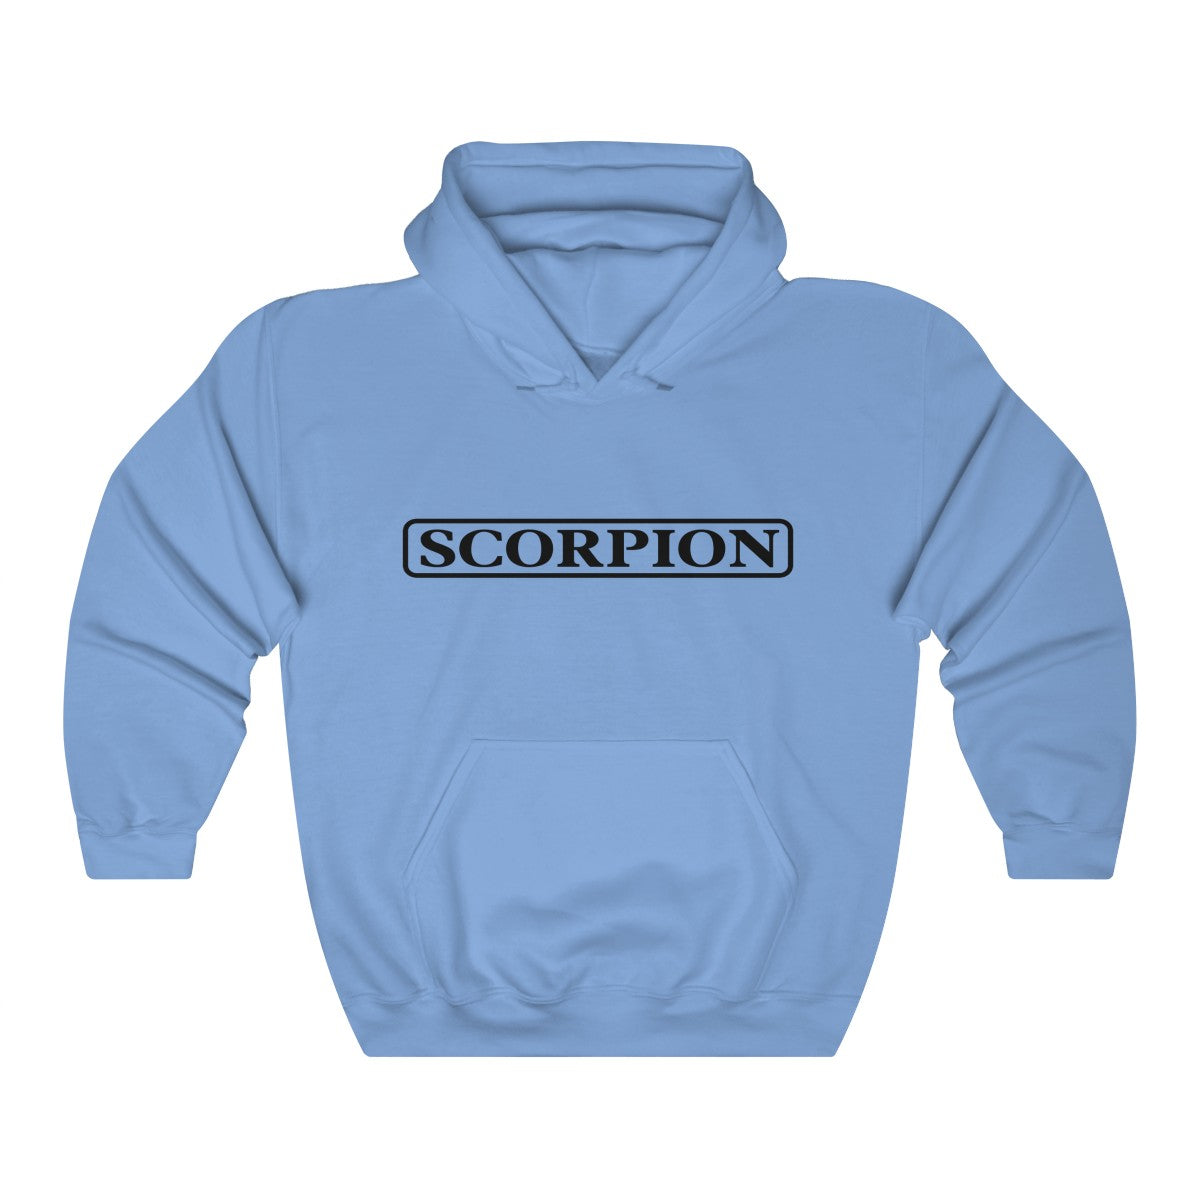 Scorpion Drizzy Drake Scary Hours Merch Inspired Heavy Blend™ Hoodie-Carolina Blue-S-Archethype